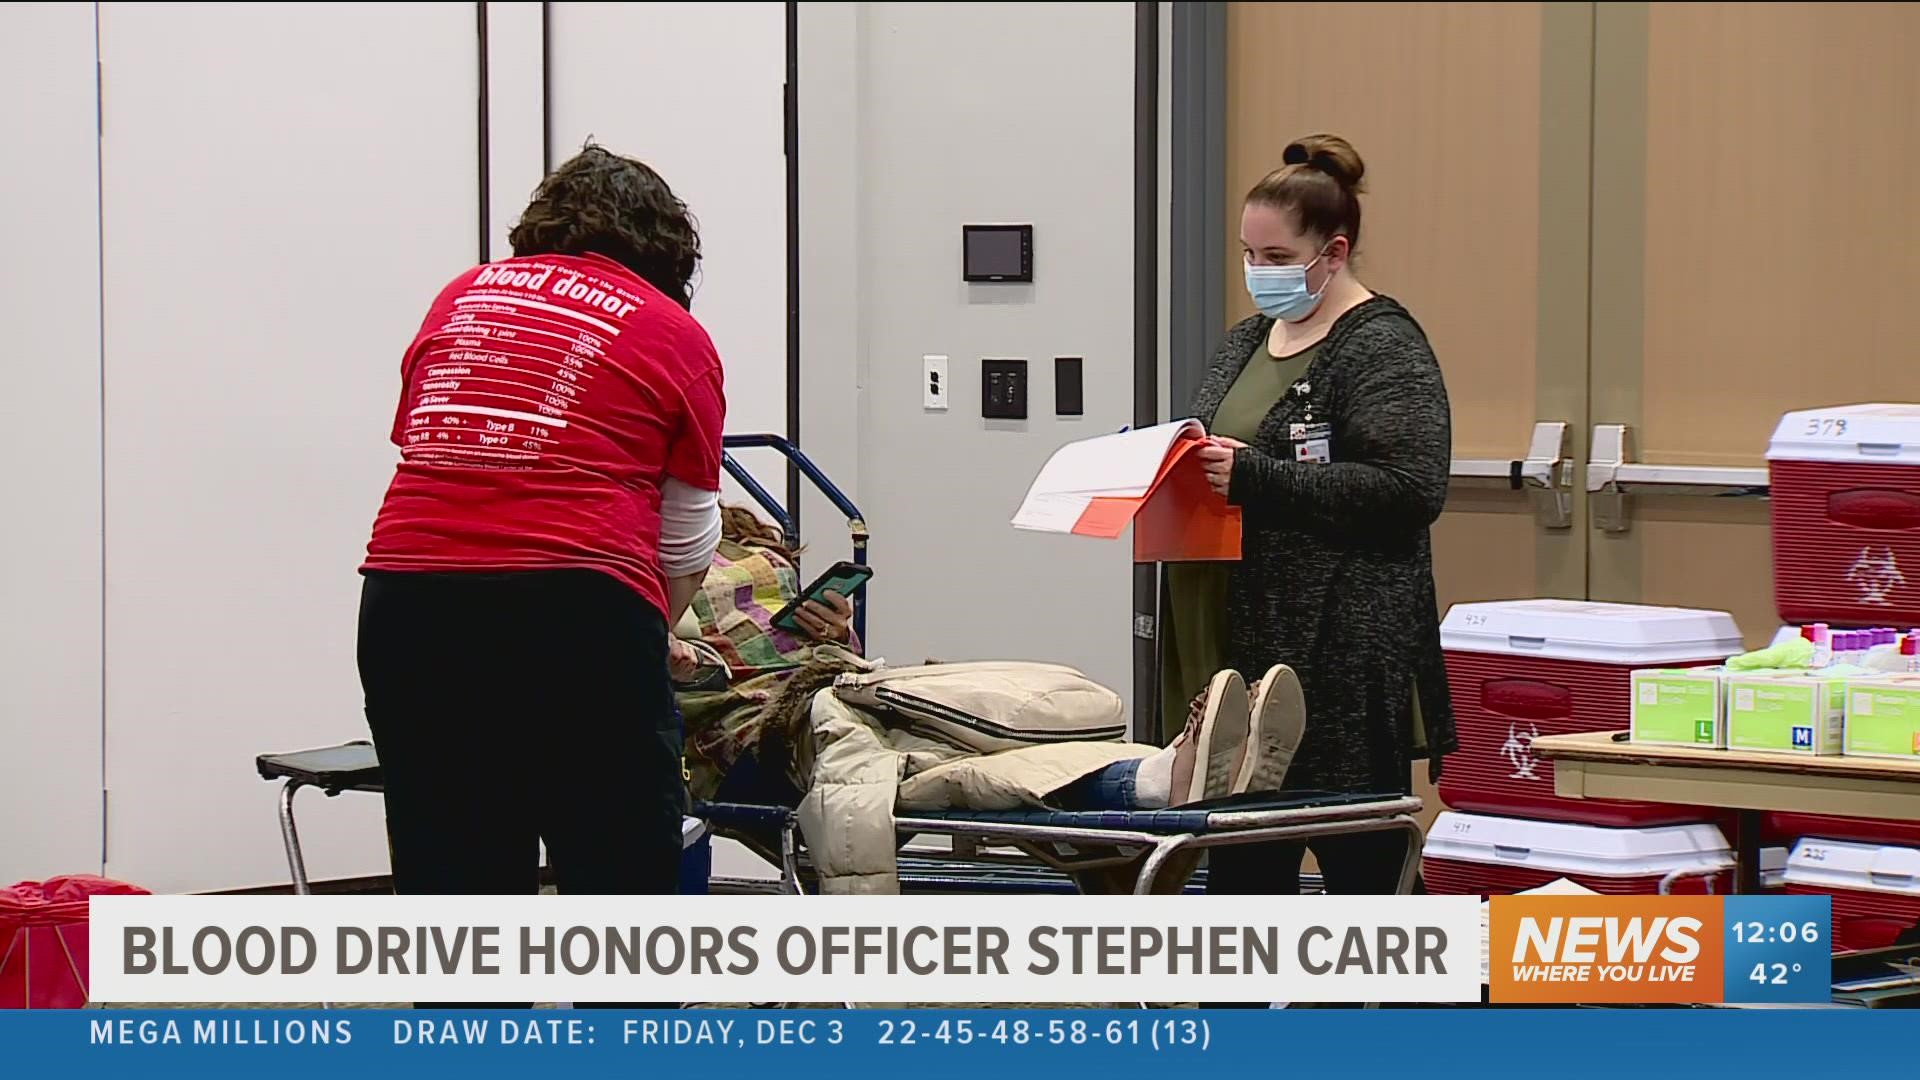 It's been two years since the tragic death of late Fayetteville Officer Stephen Carr and the city is honoring him by hosting a special blood drive.